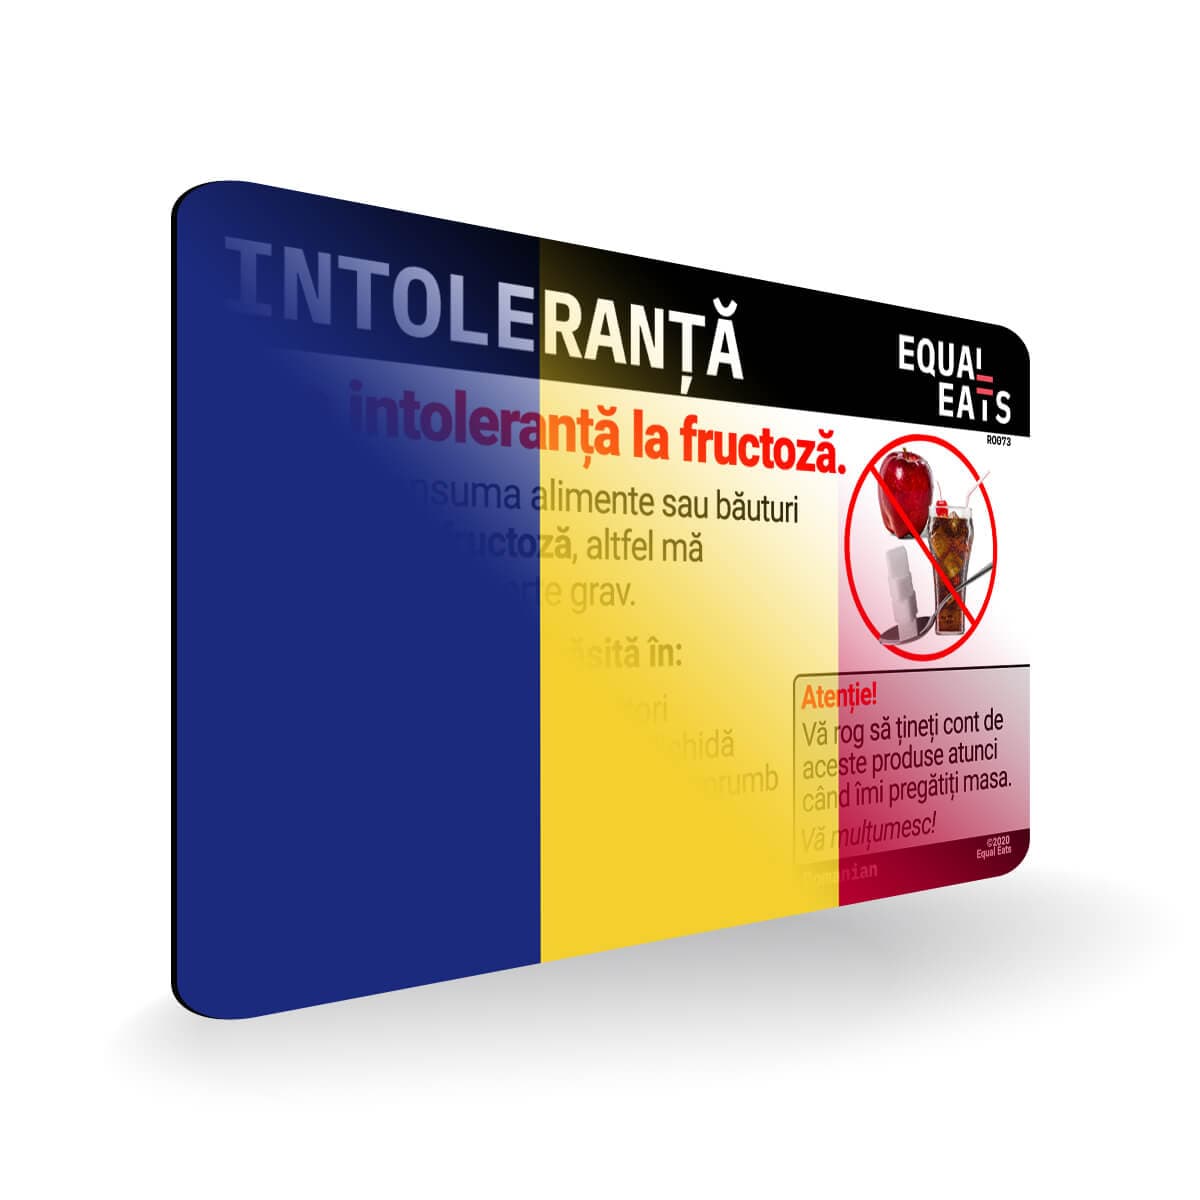 Fructose Intolerance in Romanian. Fructose Intolerant Card for Romania